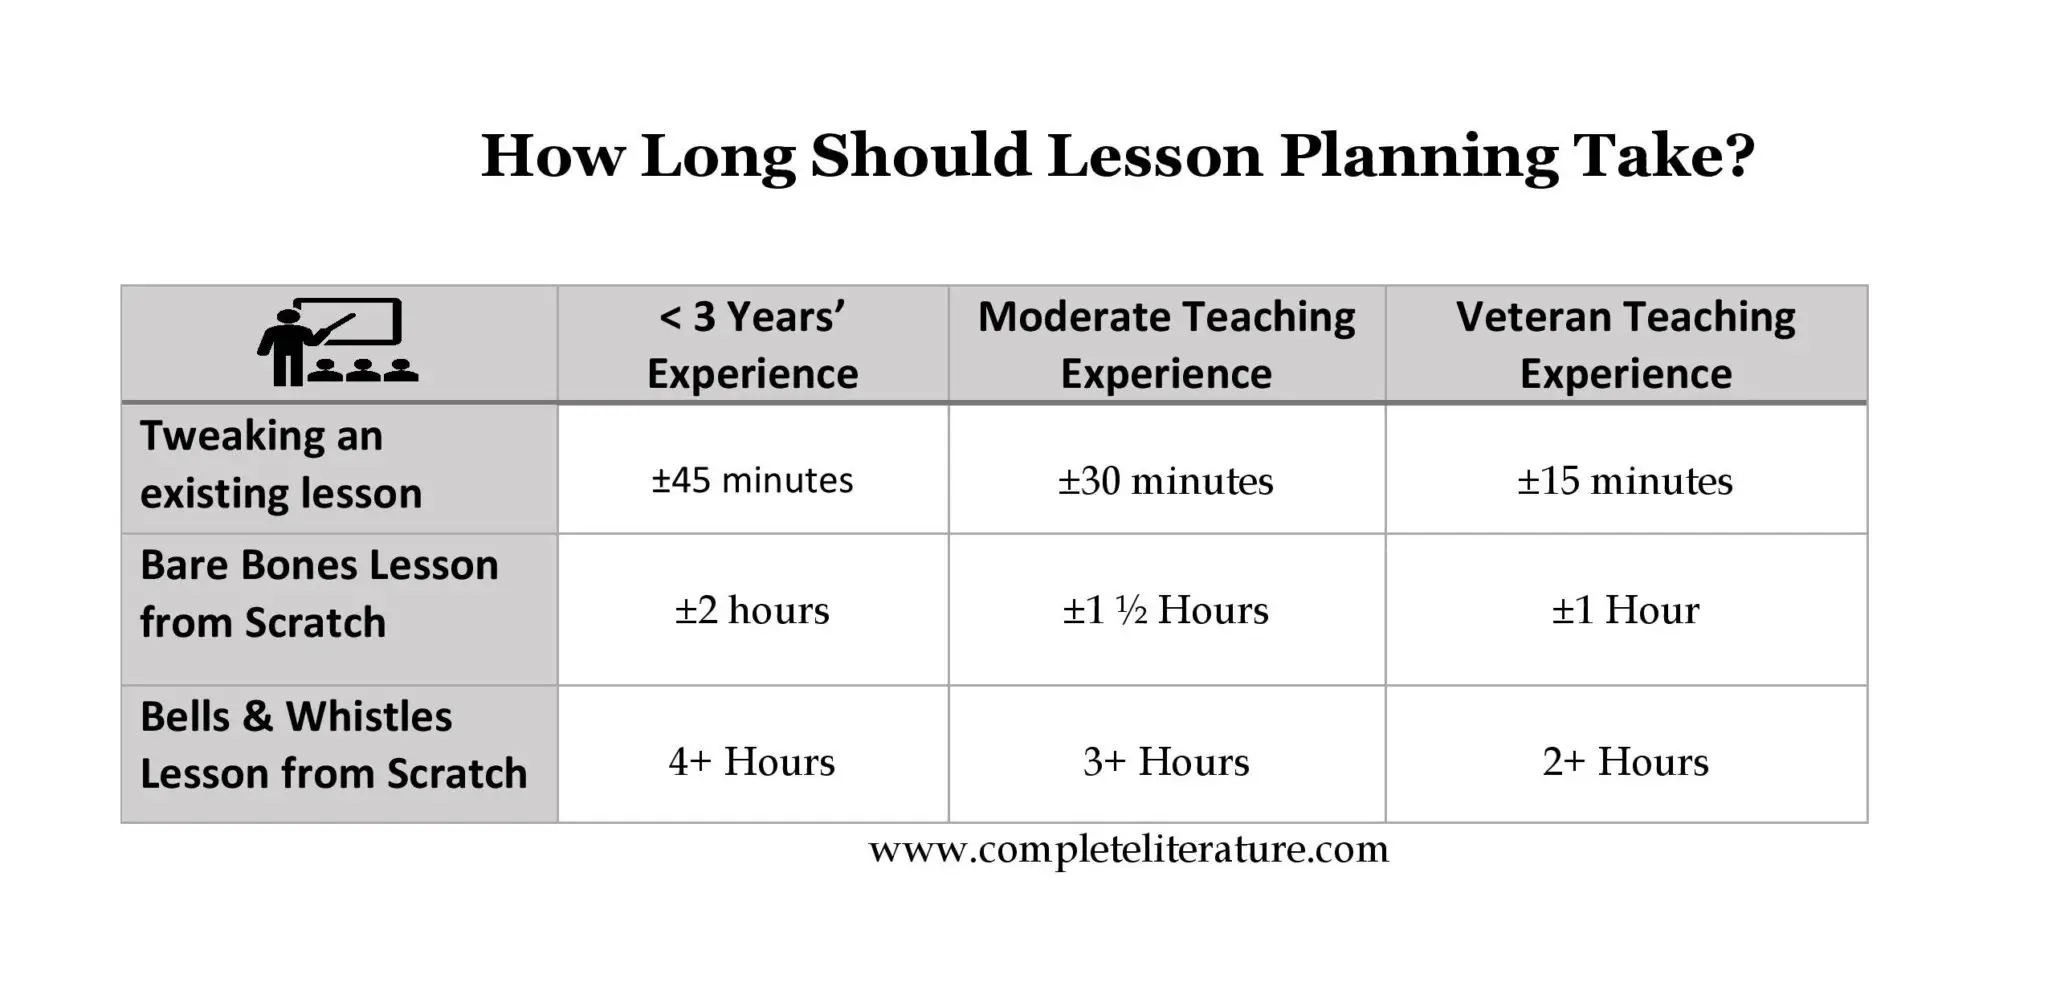 How Long Should Lesson Planning Take?